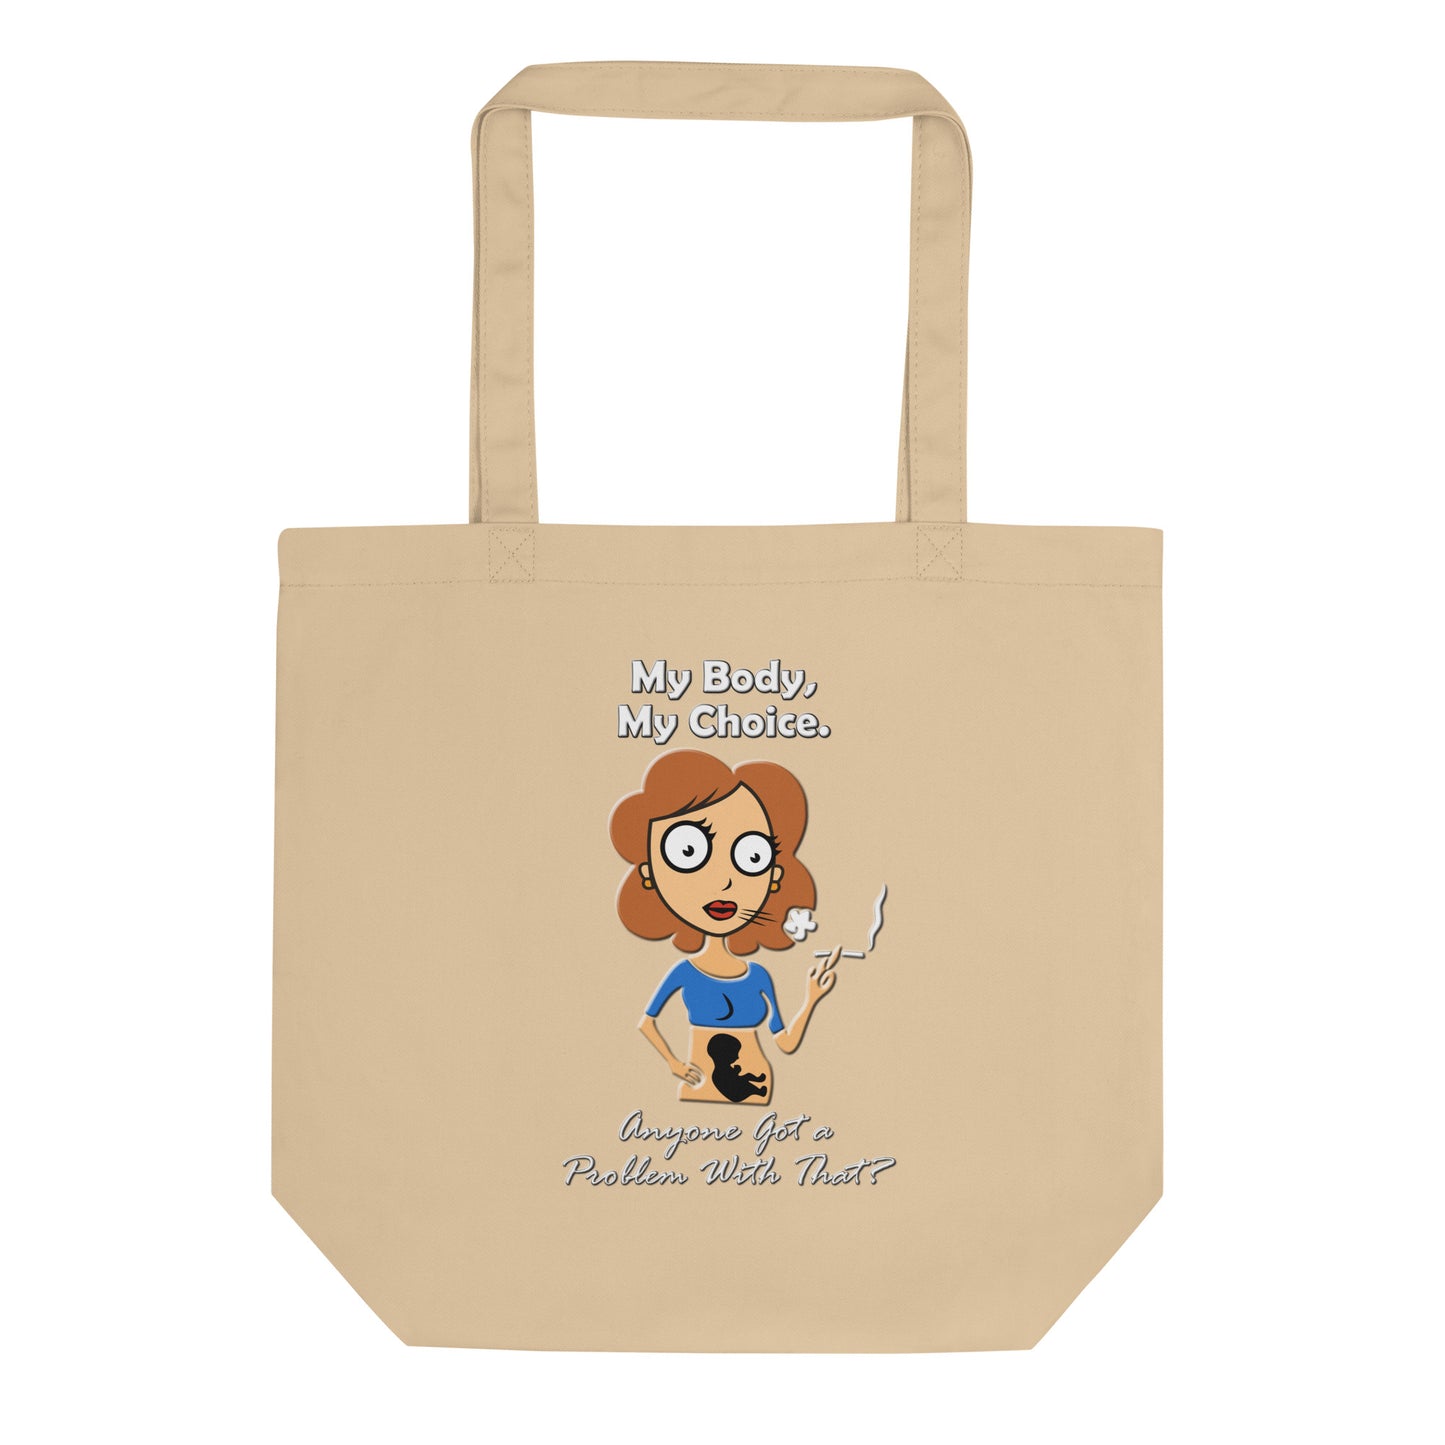 A015 Tote – Eco Tote Bag Featuring a Graphic of a Young Pregnant Woman Smoking, with the Text “My Body, My Choice – Anyone Got a Problem with That?”